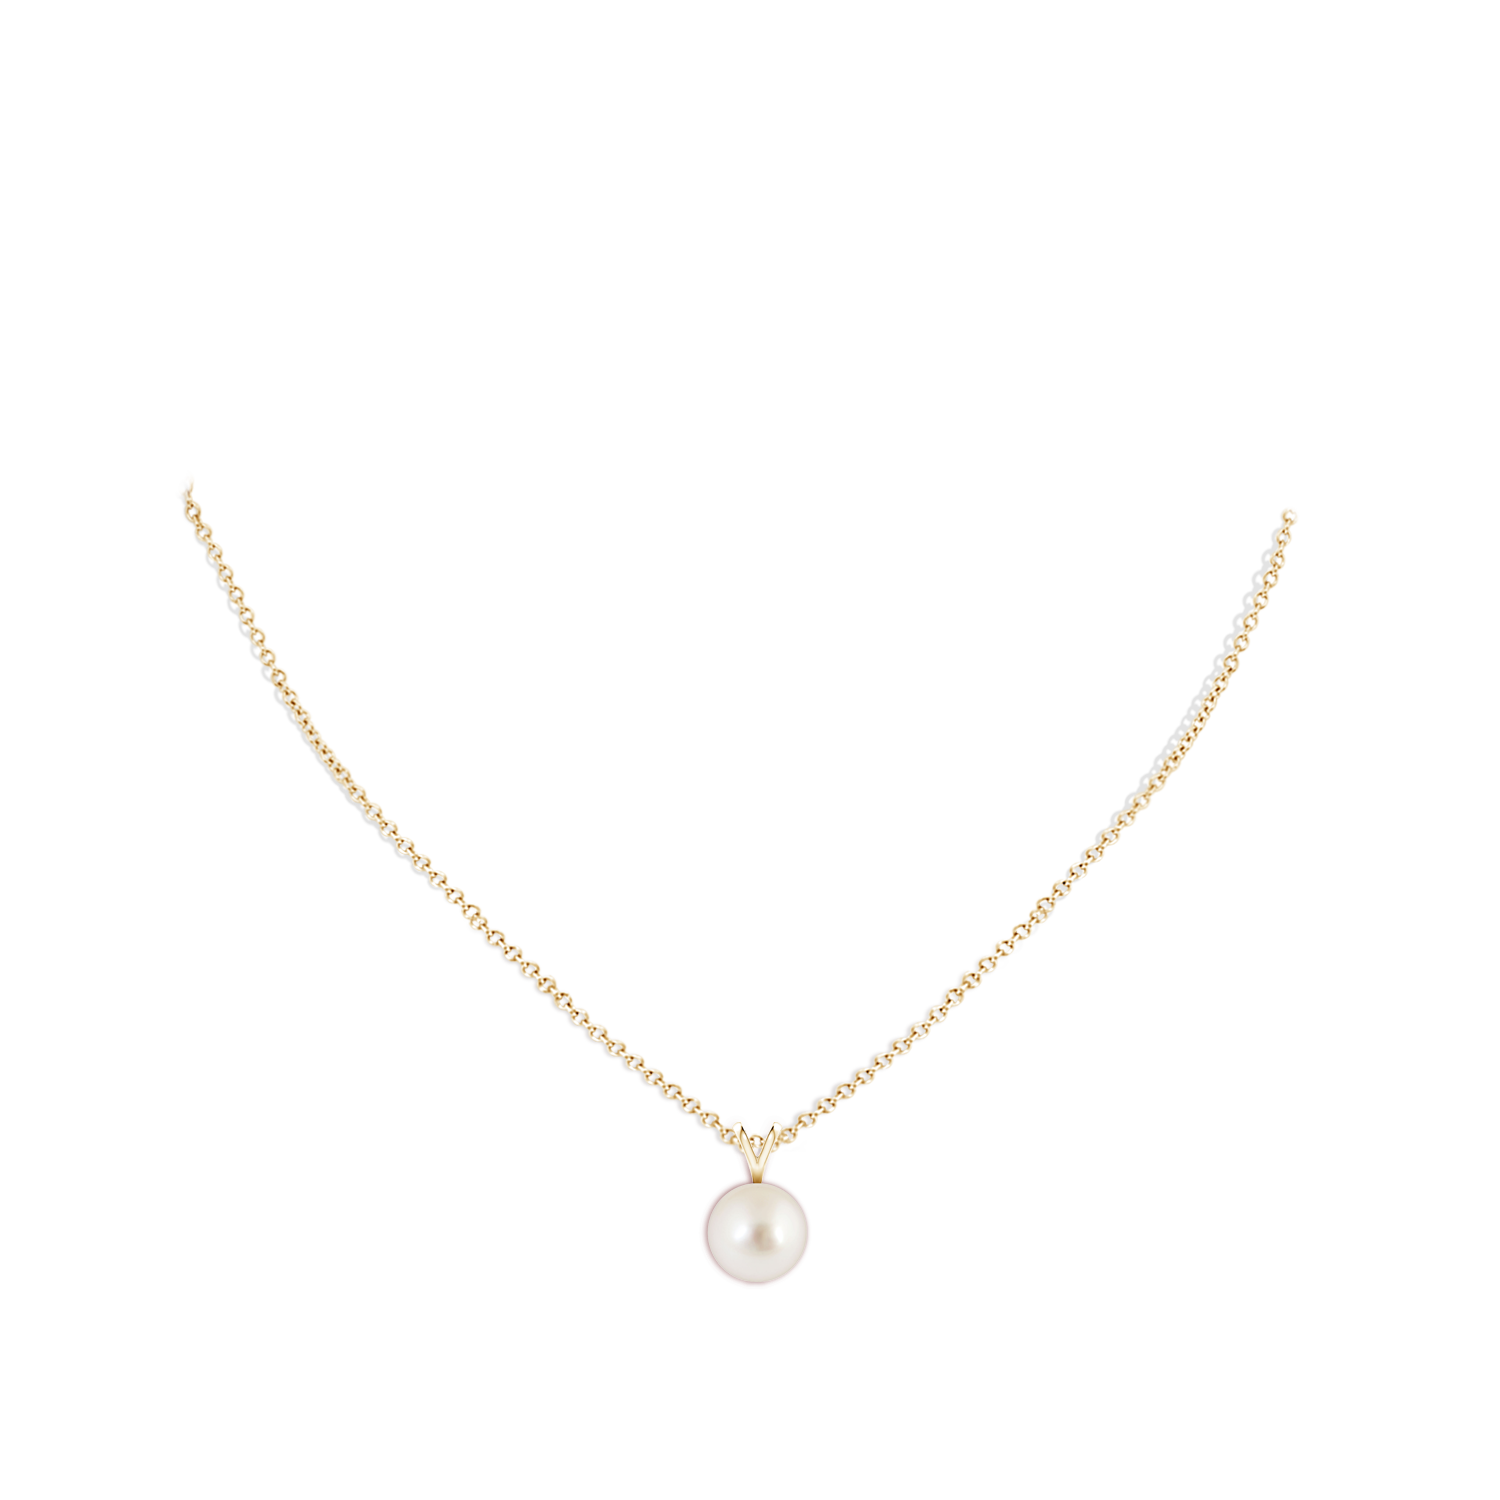 AAAA - South Sea Cultured Pearl / 7.2 CT / 14 KT Yellow Gold